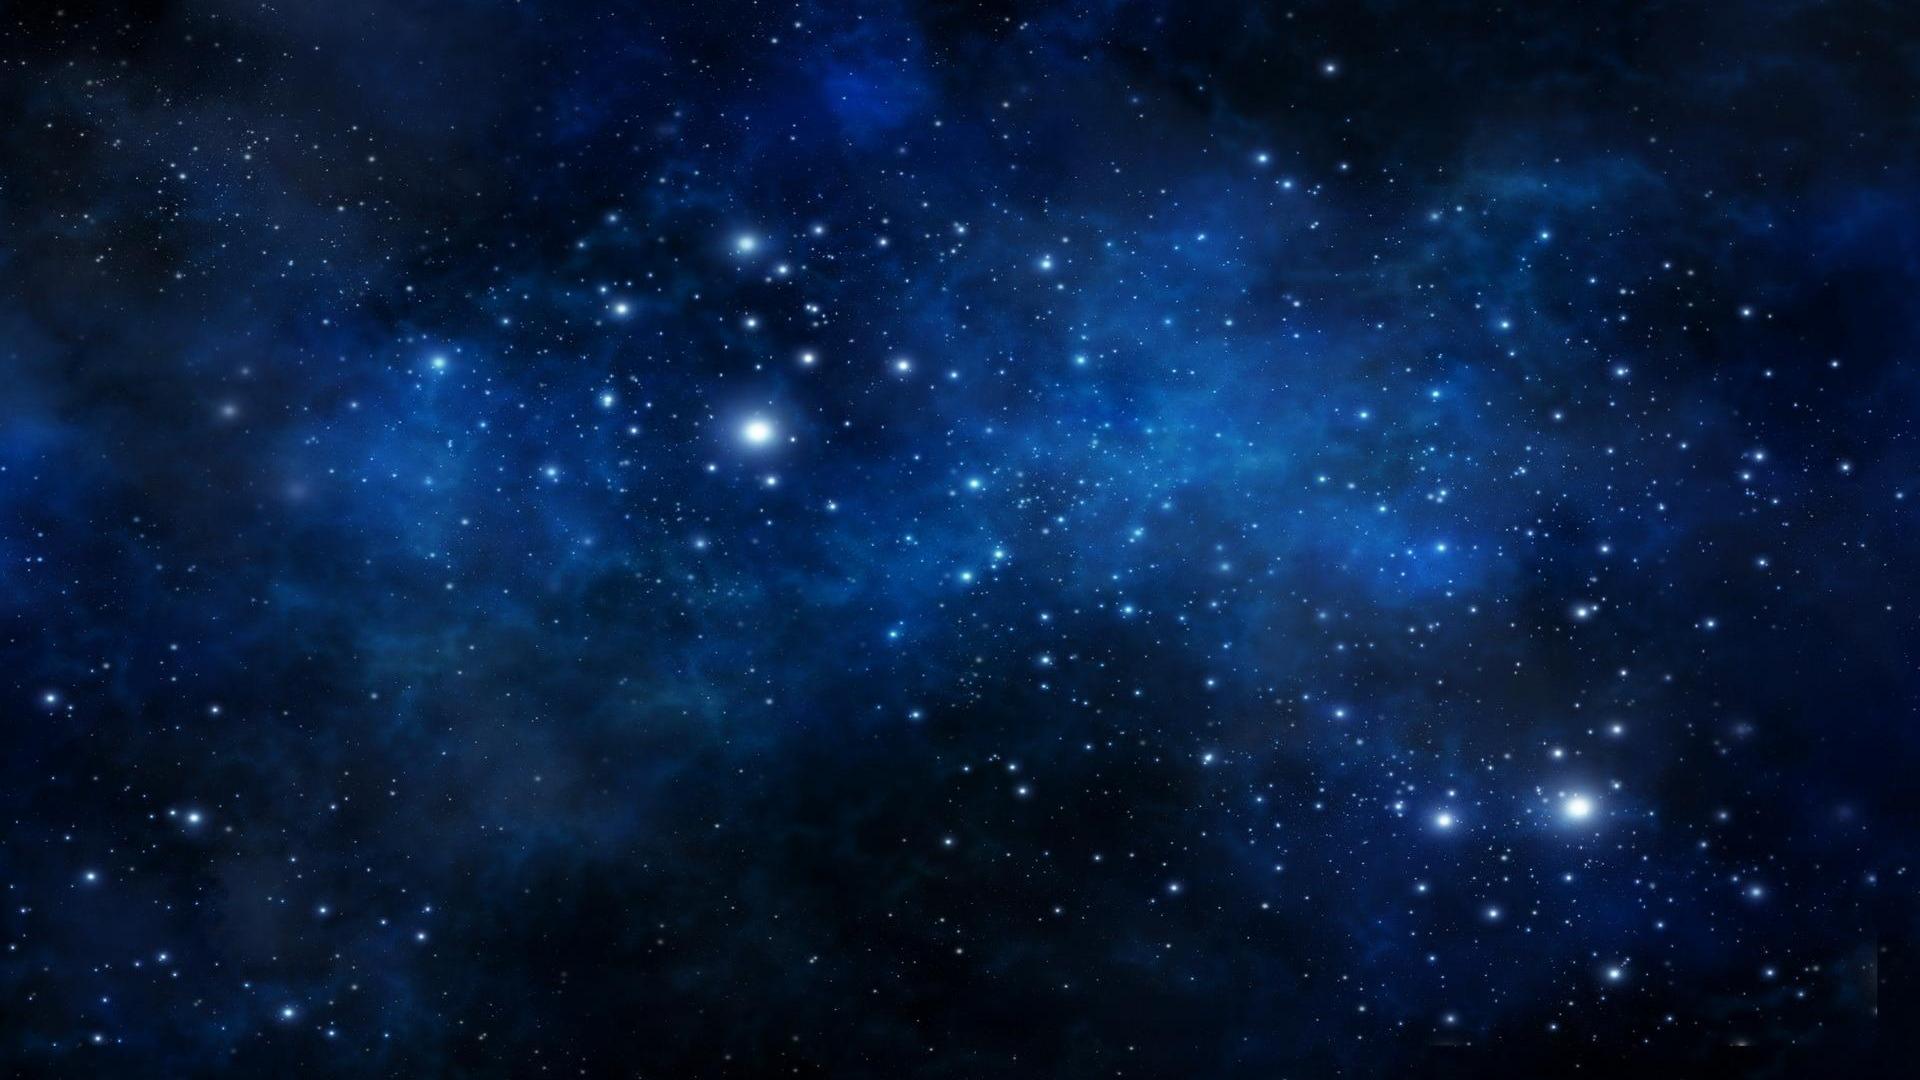 Hd wallpapers space universe